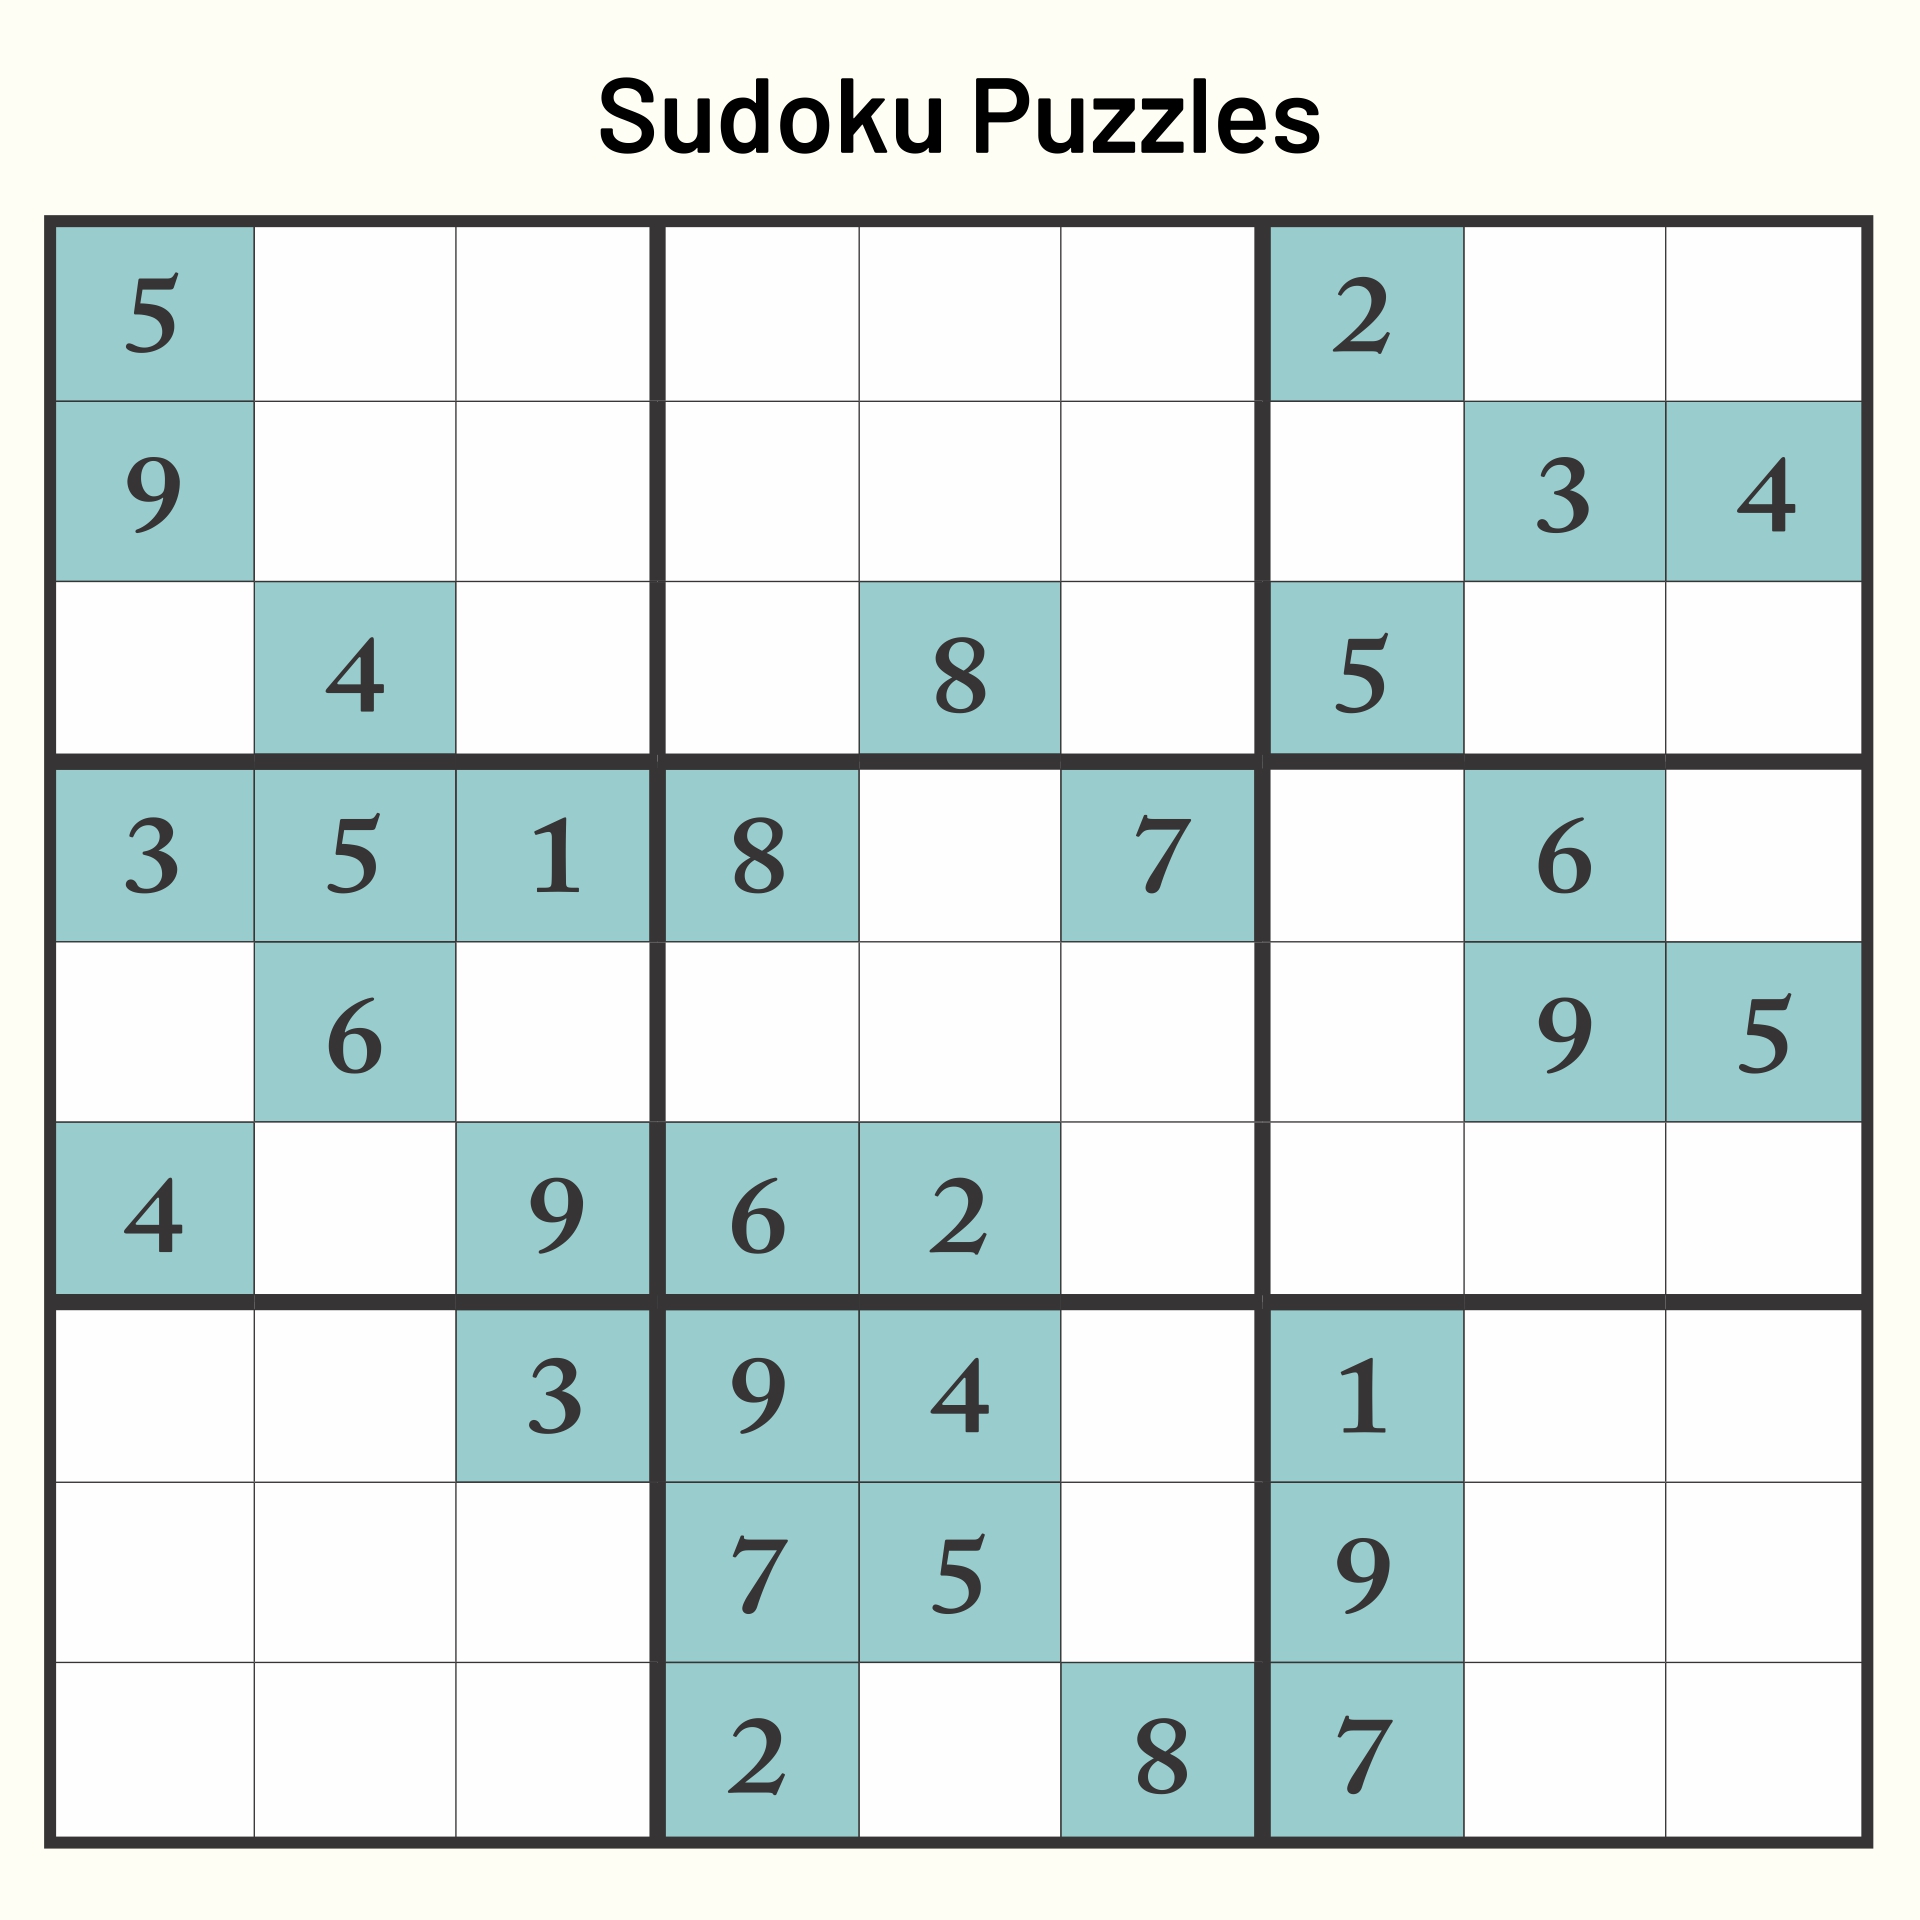 5-best-images-of-printable-sudoku-puzzles-to-print-printable-sudoku